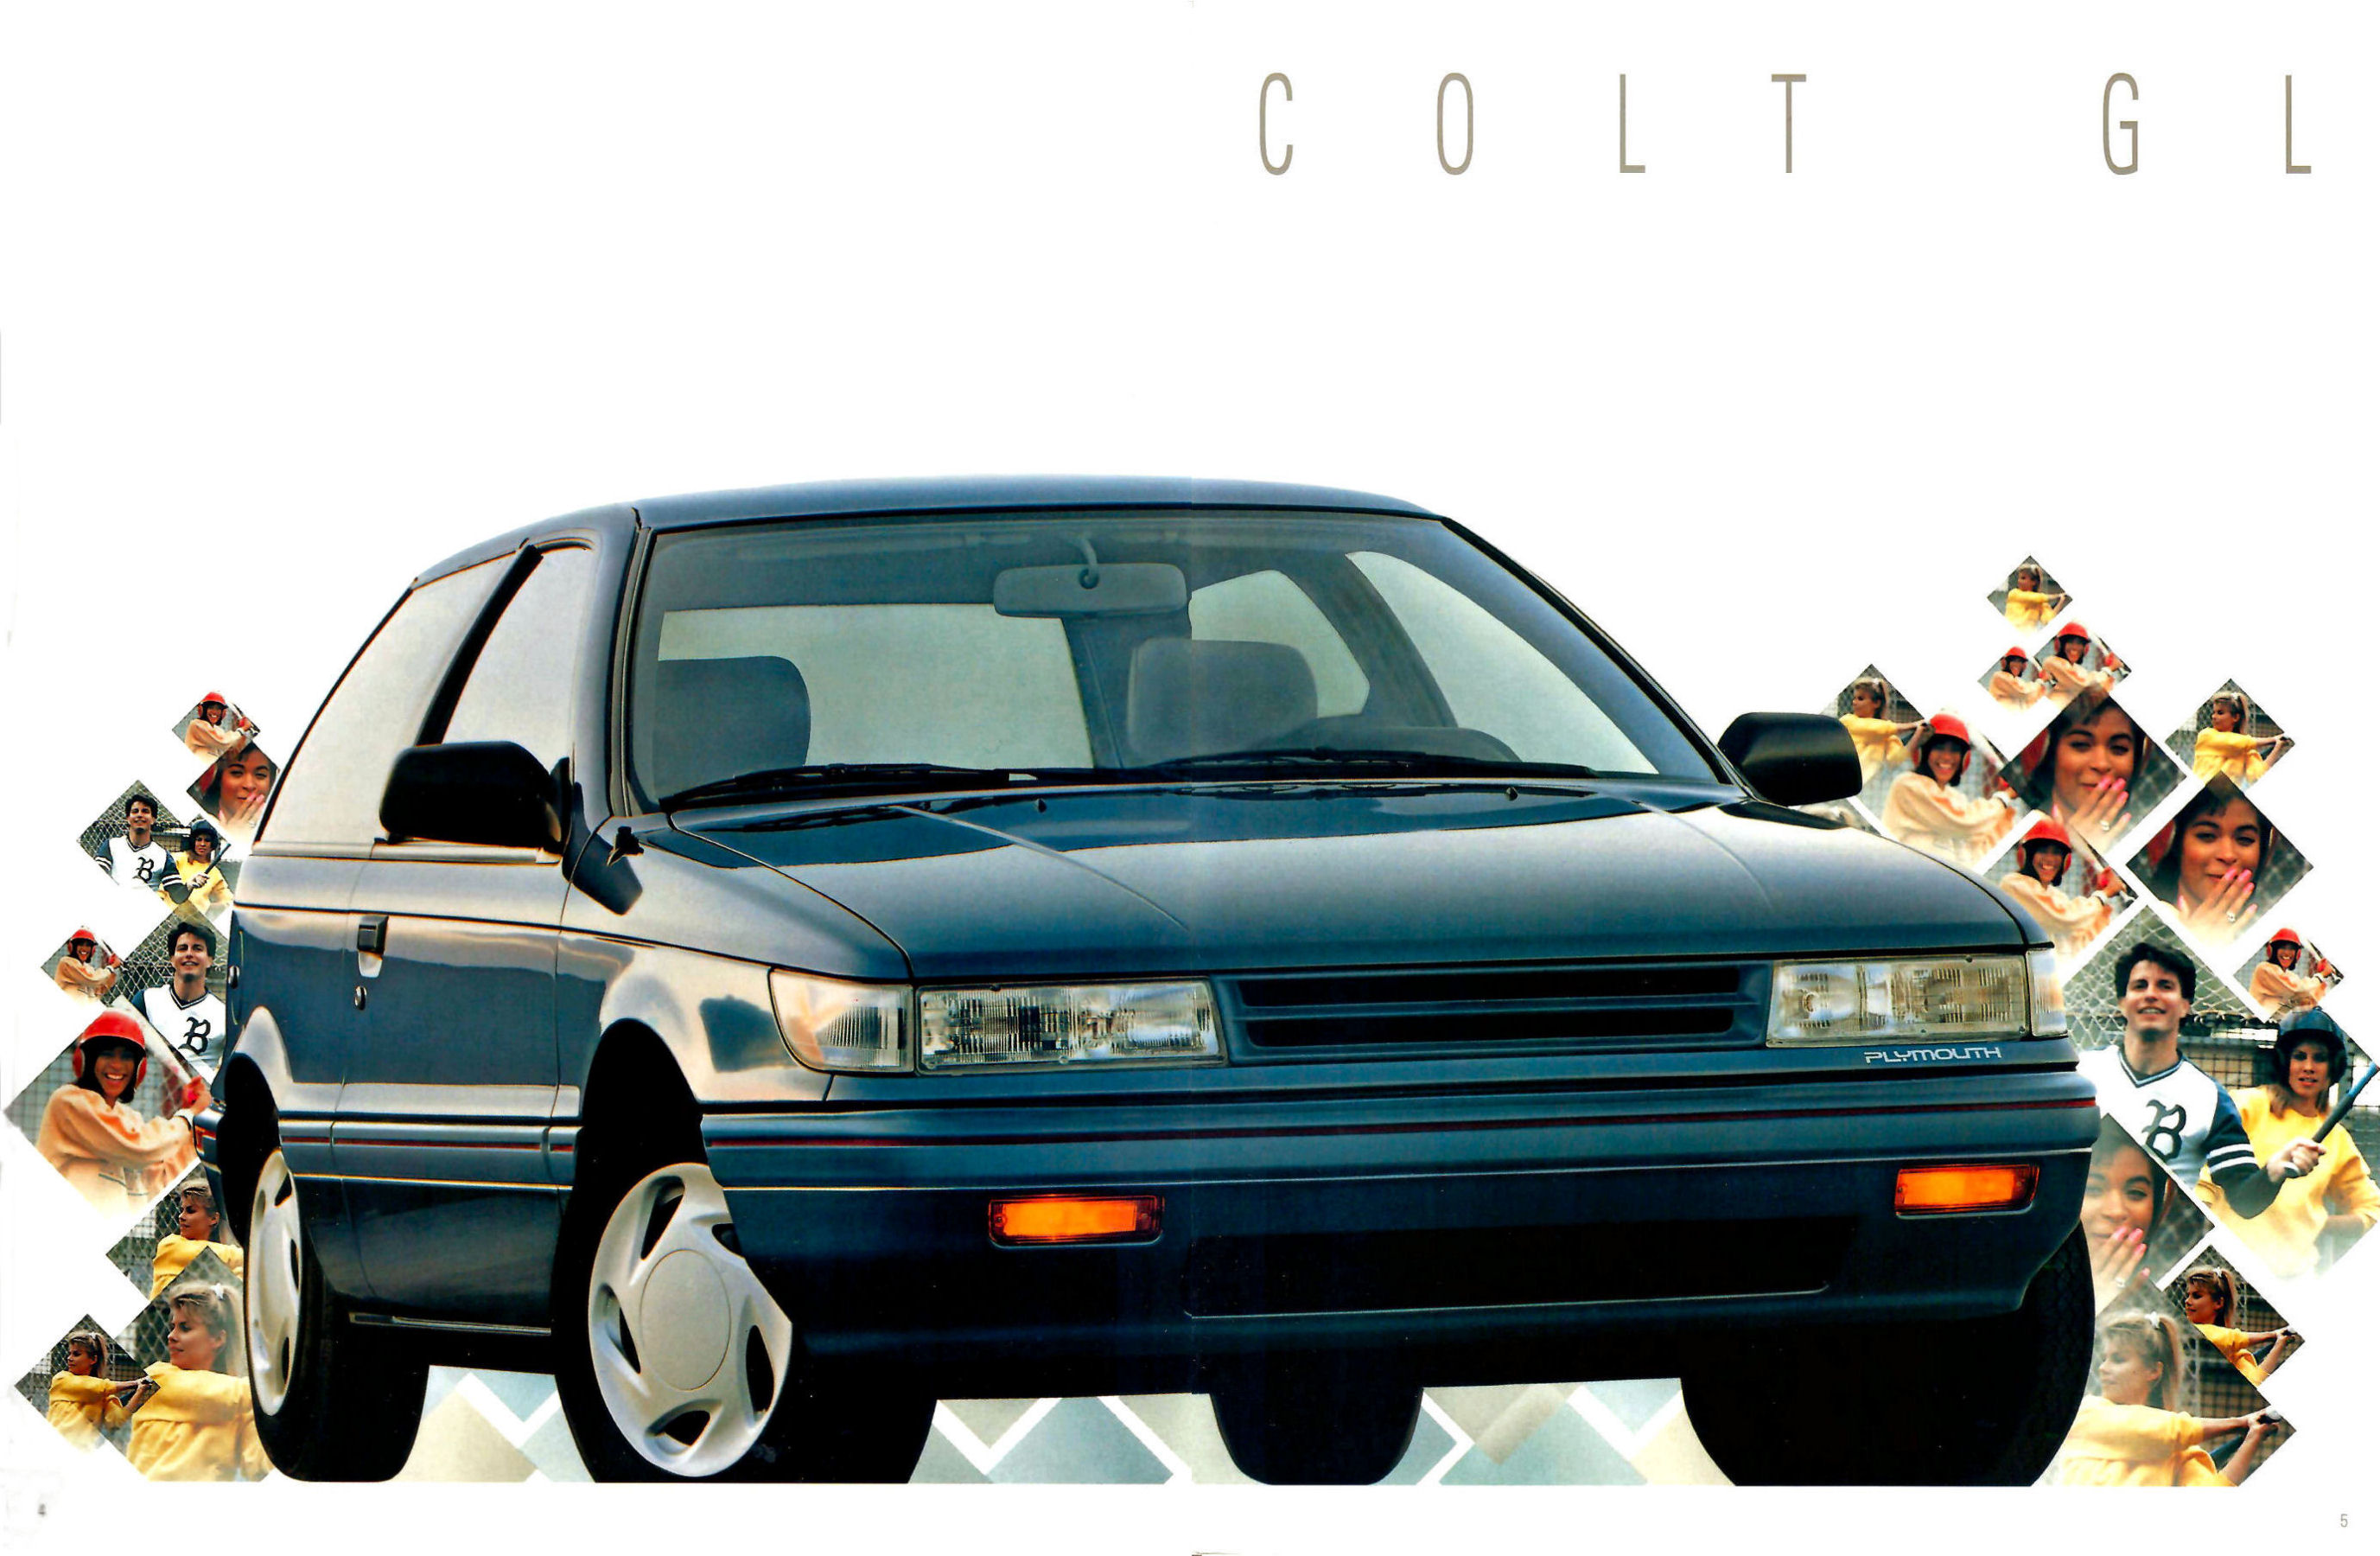 1991 Plymouth Colt-04-05